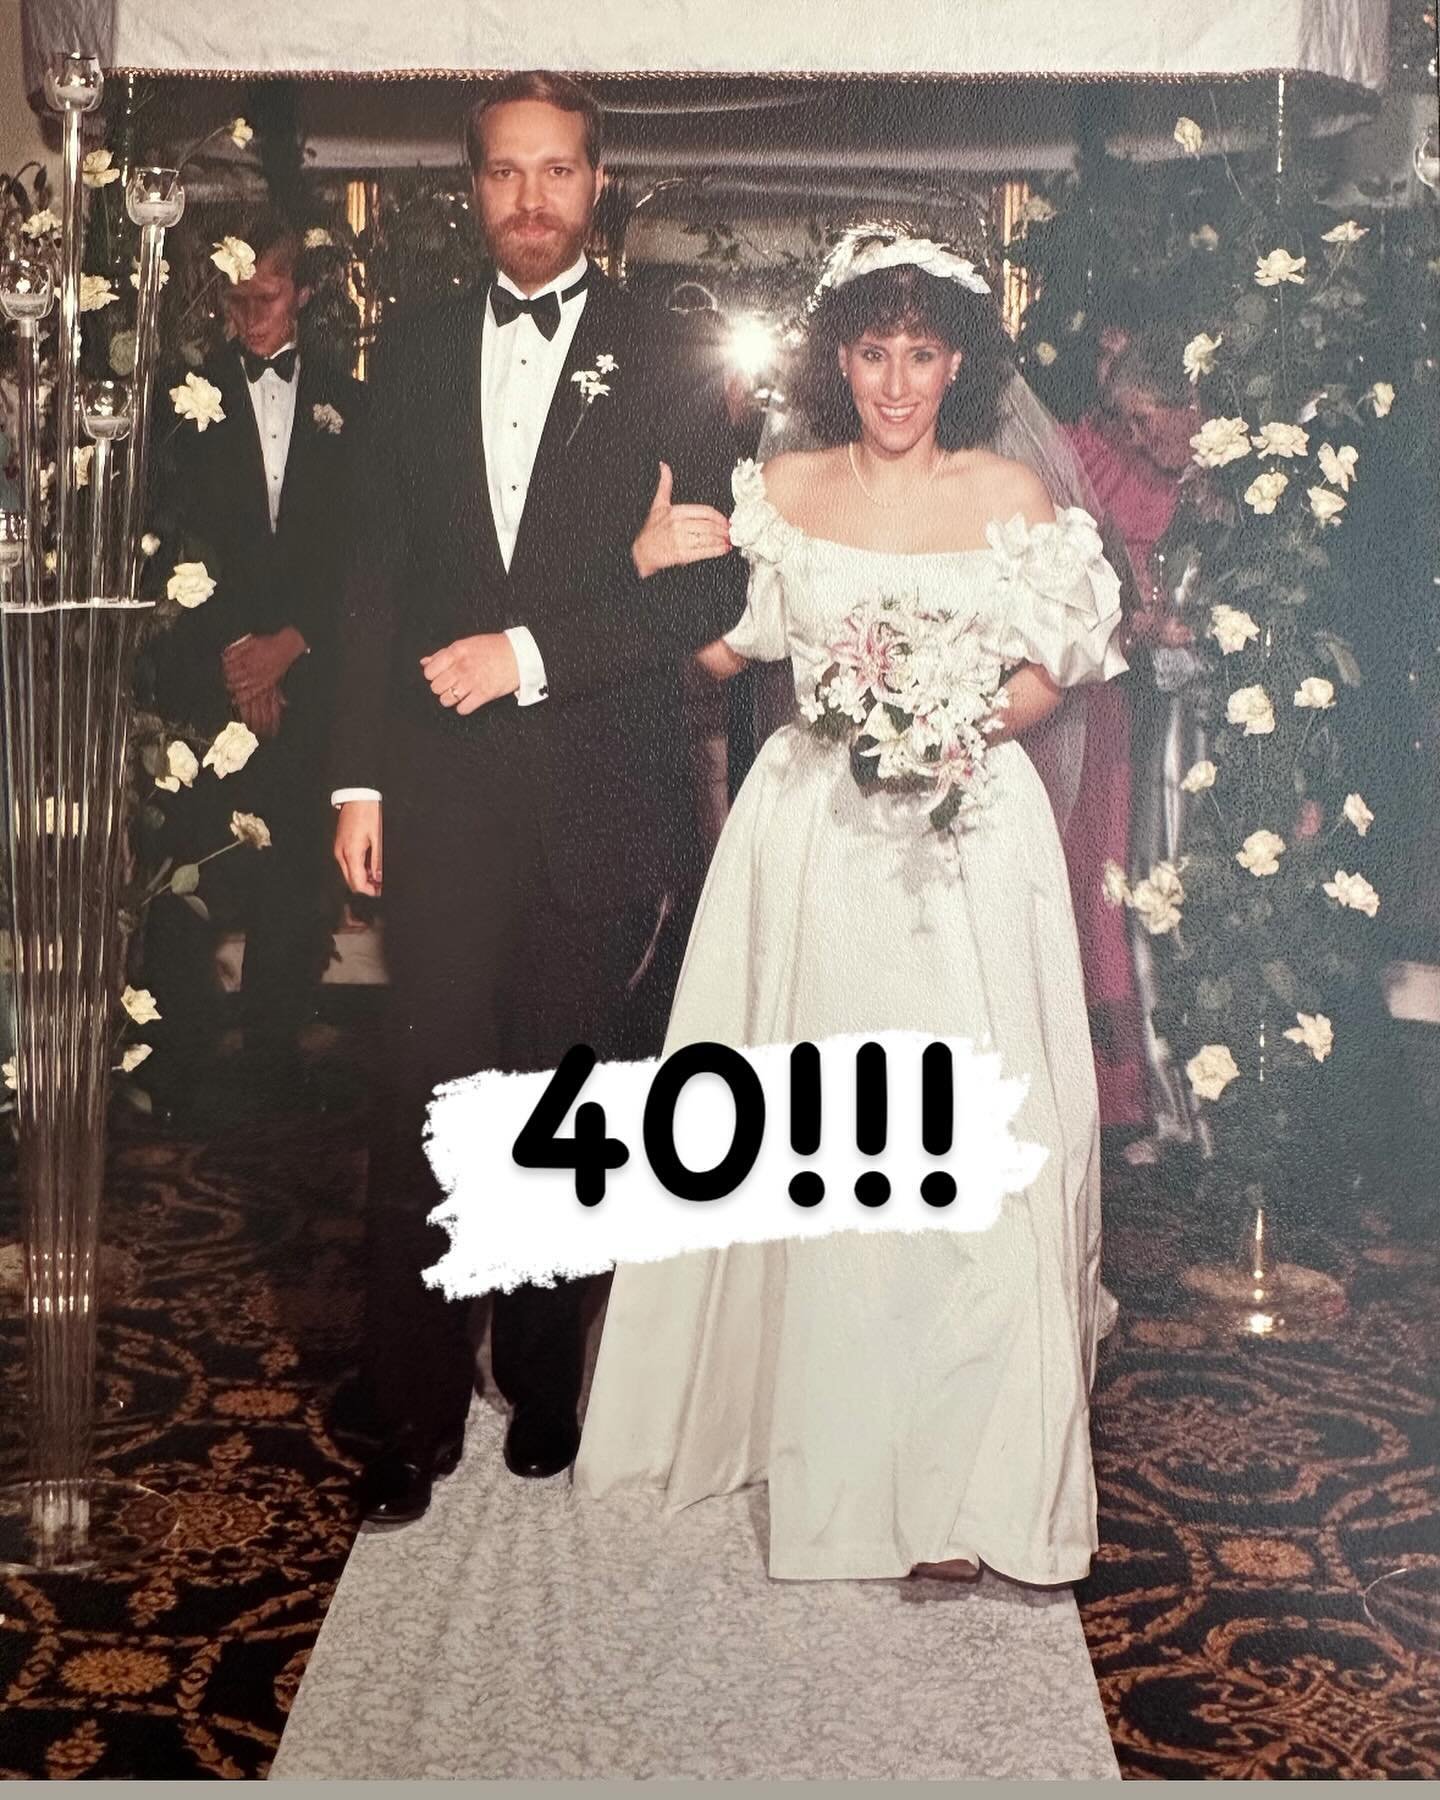 Well, that went fast! 40 years married to my best friend, my heartthrob, and the wind beneath my wings. ❤️

@ronpeep #anniversary #40yearstogether #weddedbliss #thewindbeneathmywings #love